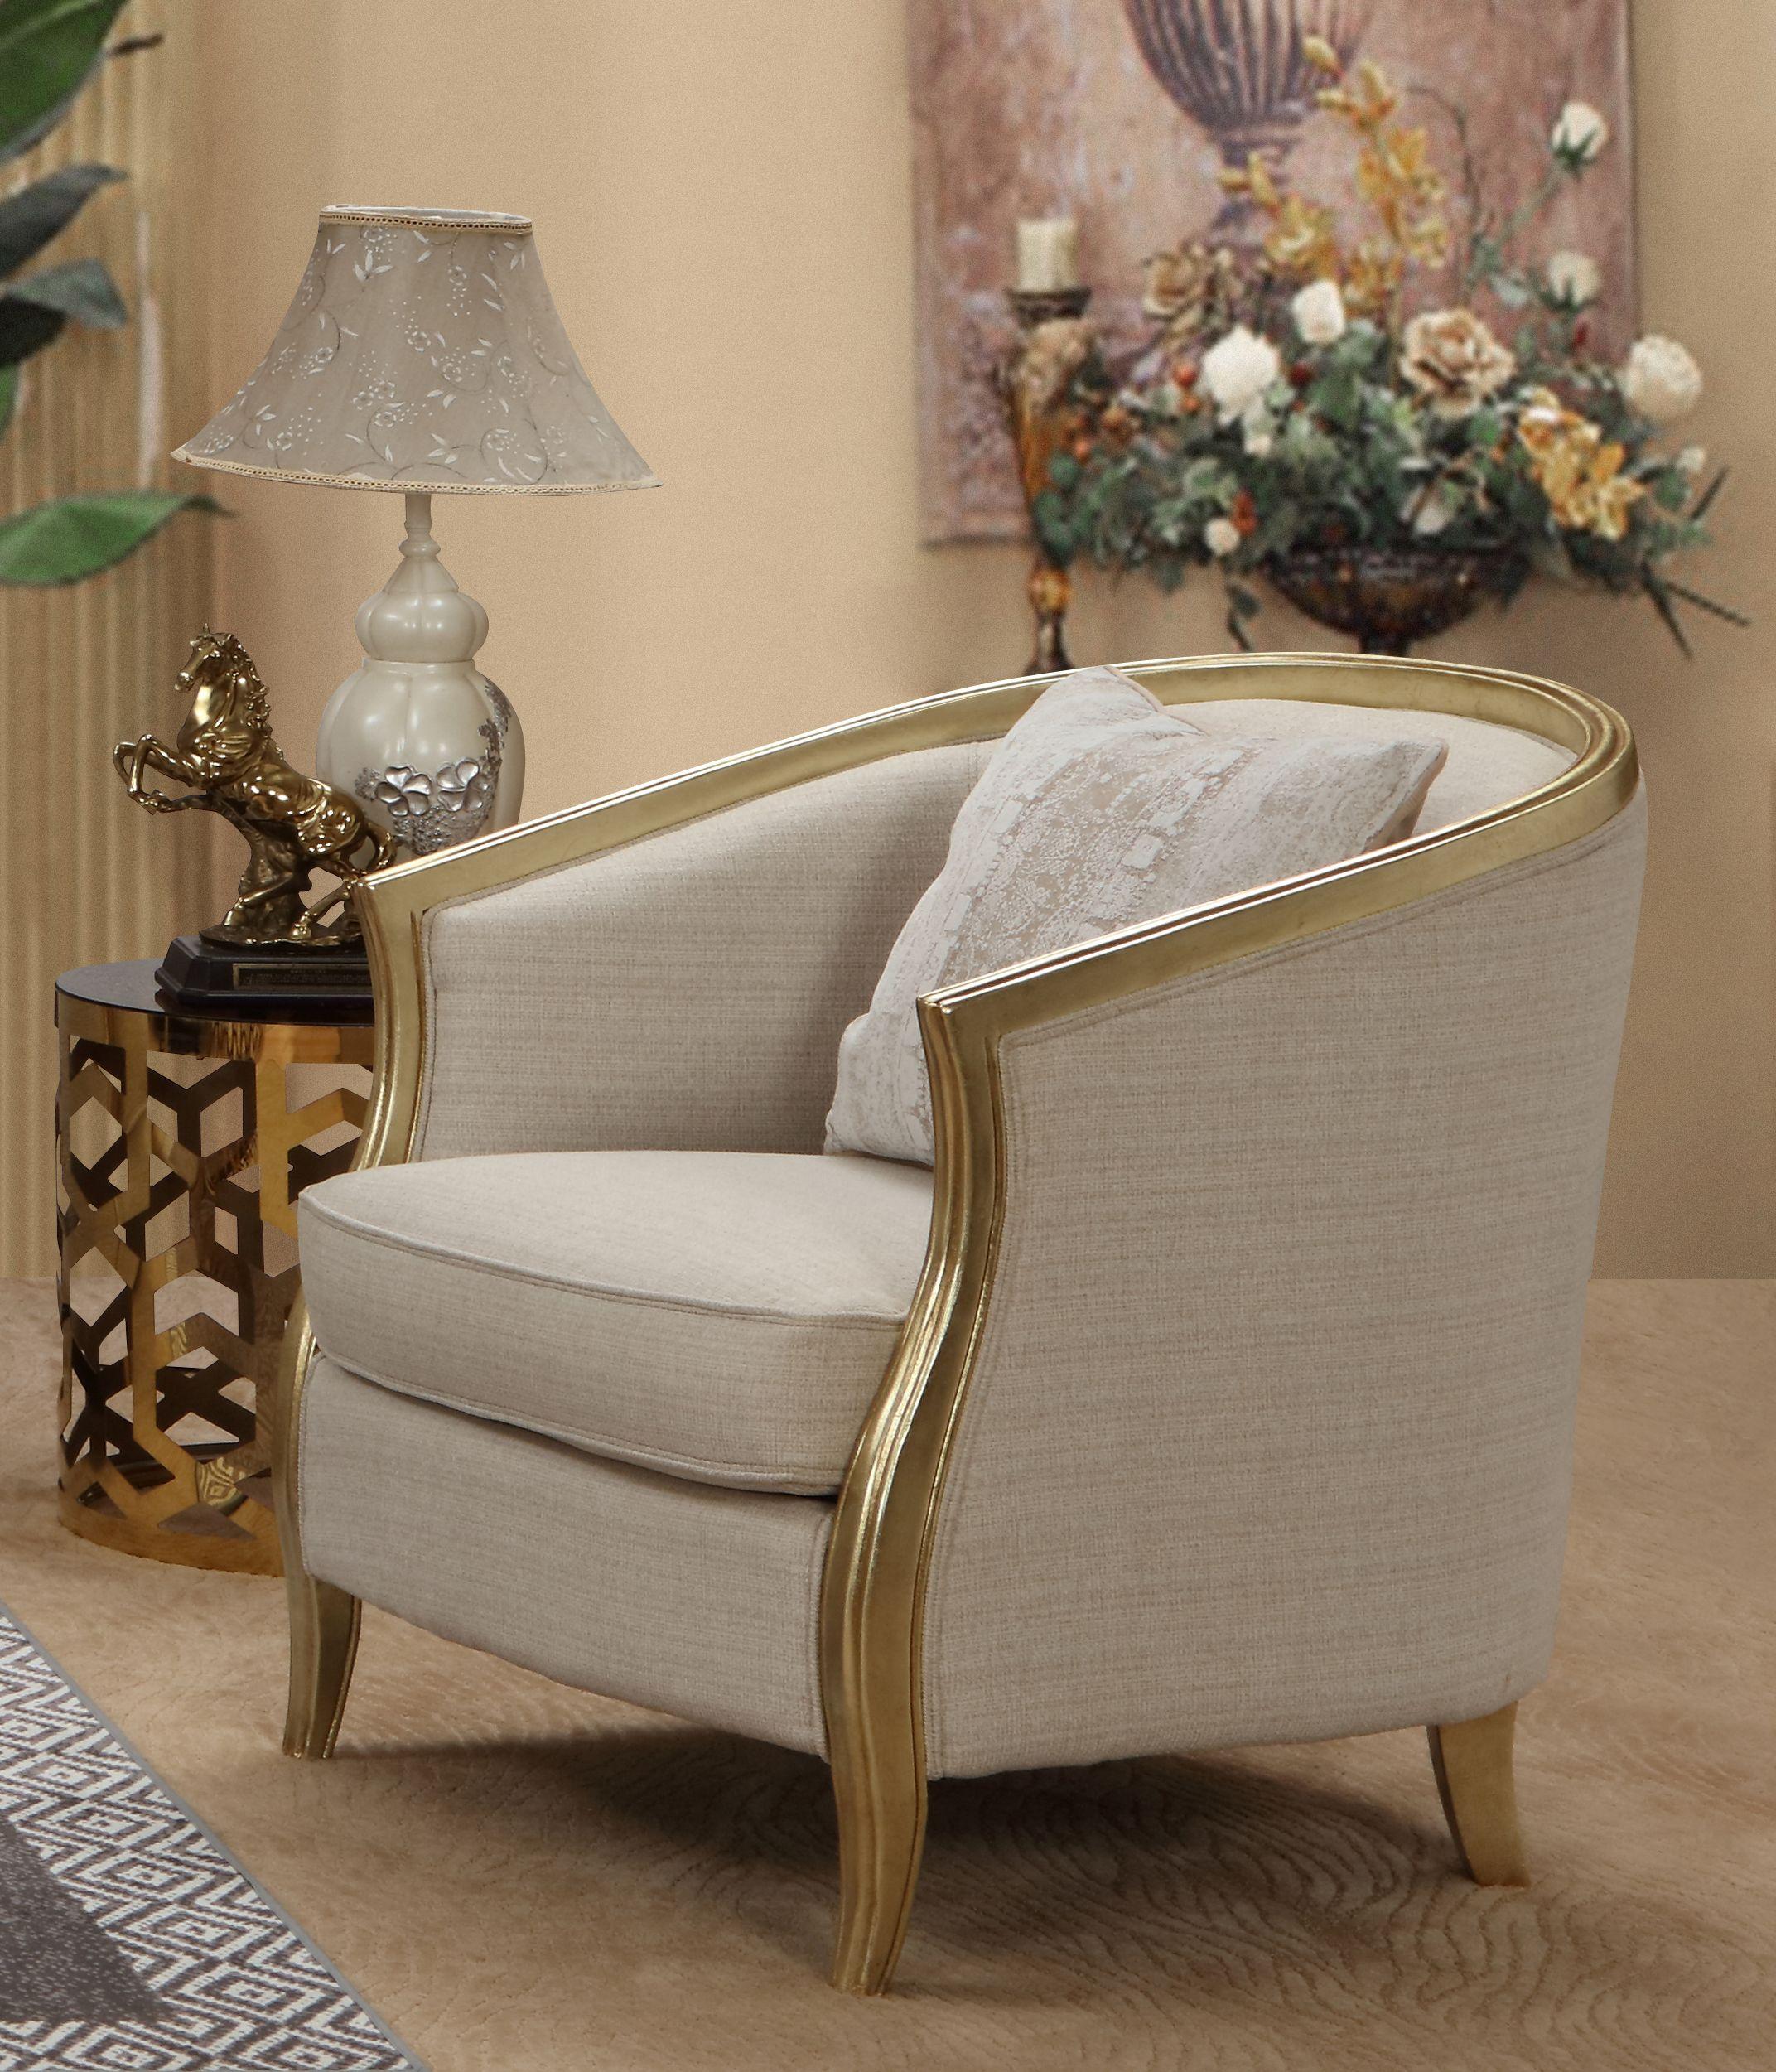 

        
Cosmos Furniture Cora Sofa Loveseat and Chair Set Gold/Beige Linen 810053743836
